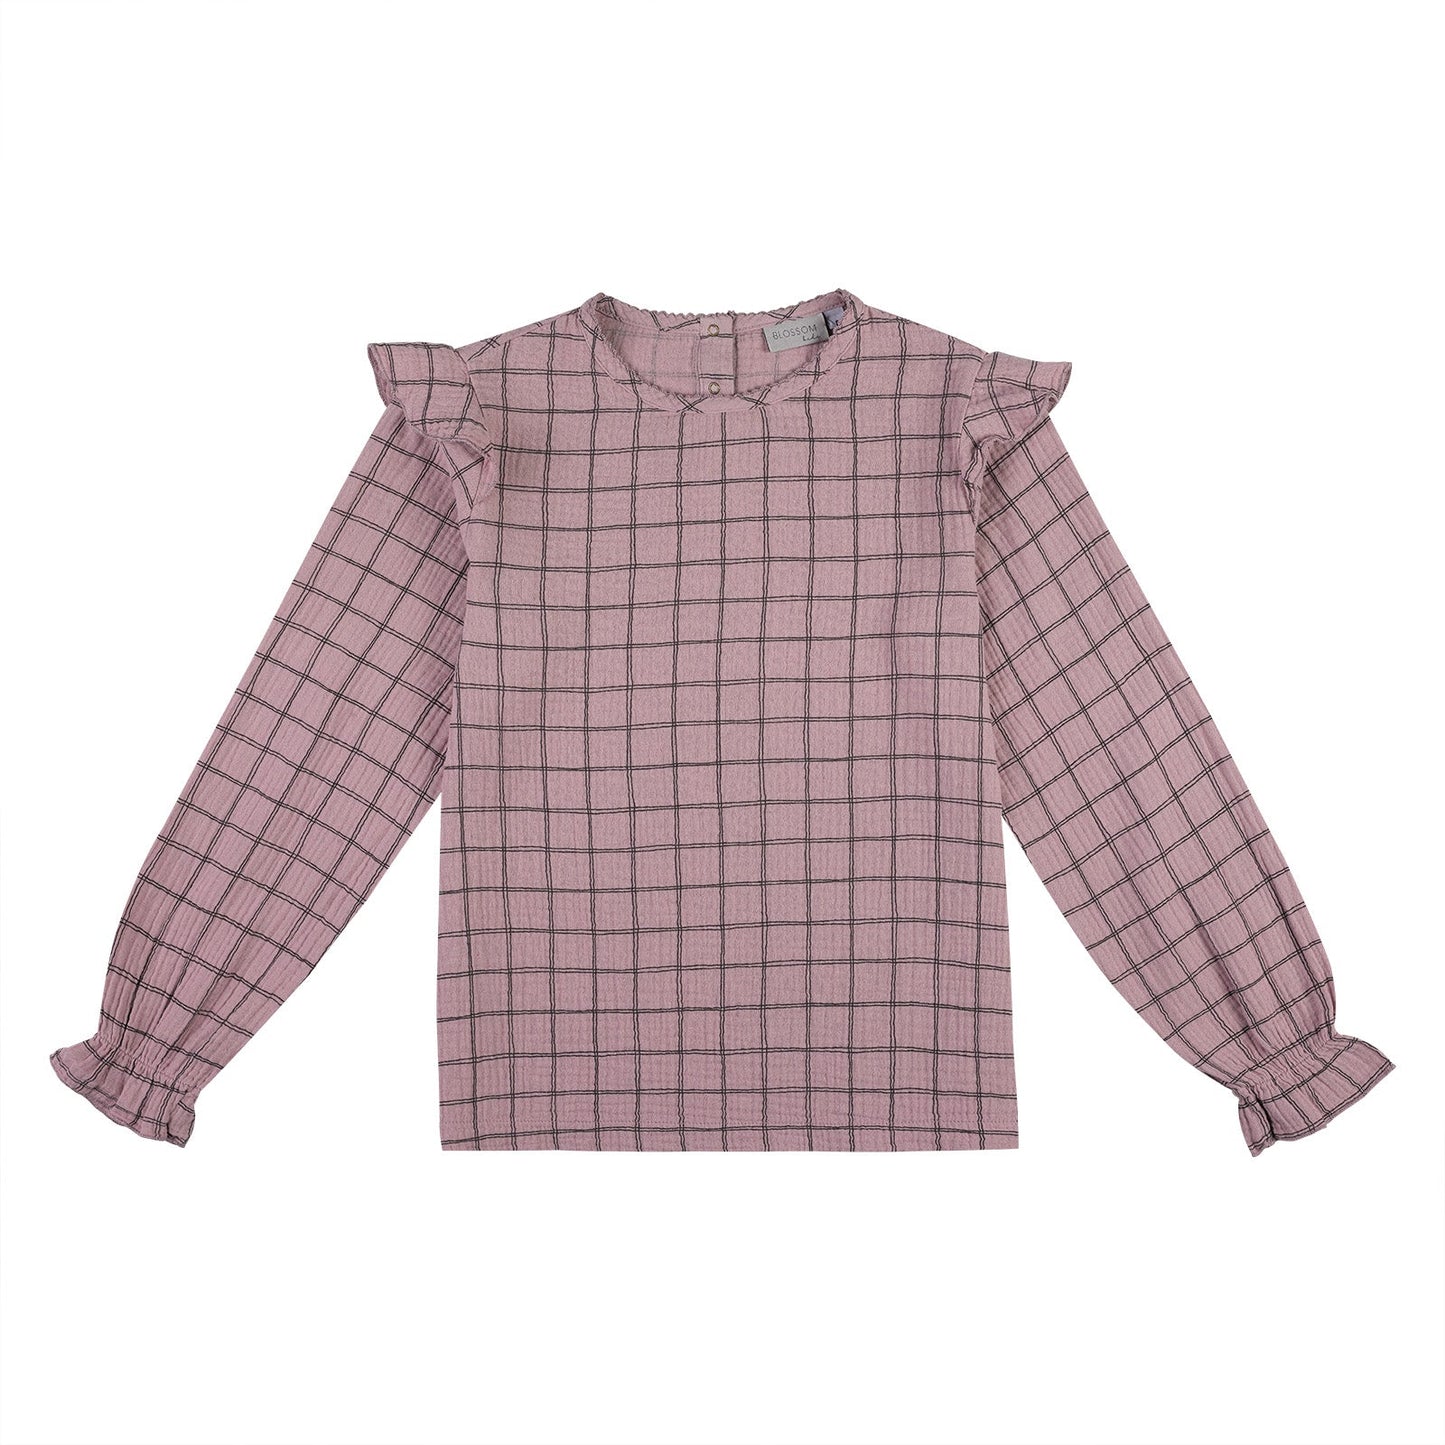 Blossom Kids - Blouse Woven Double Grid